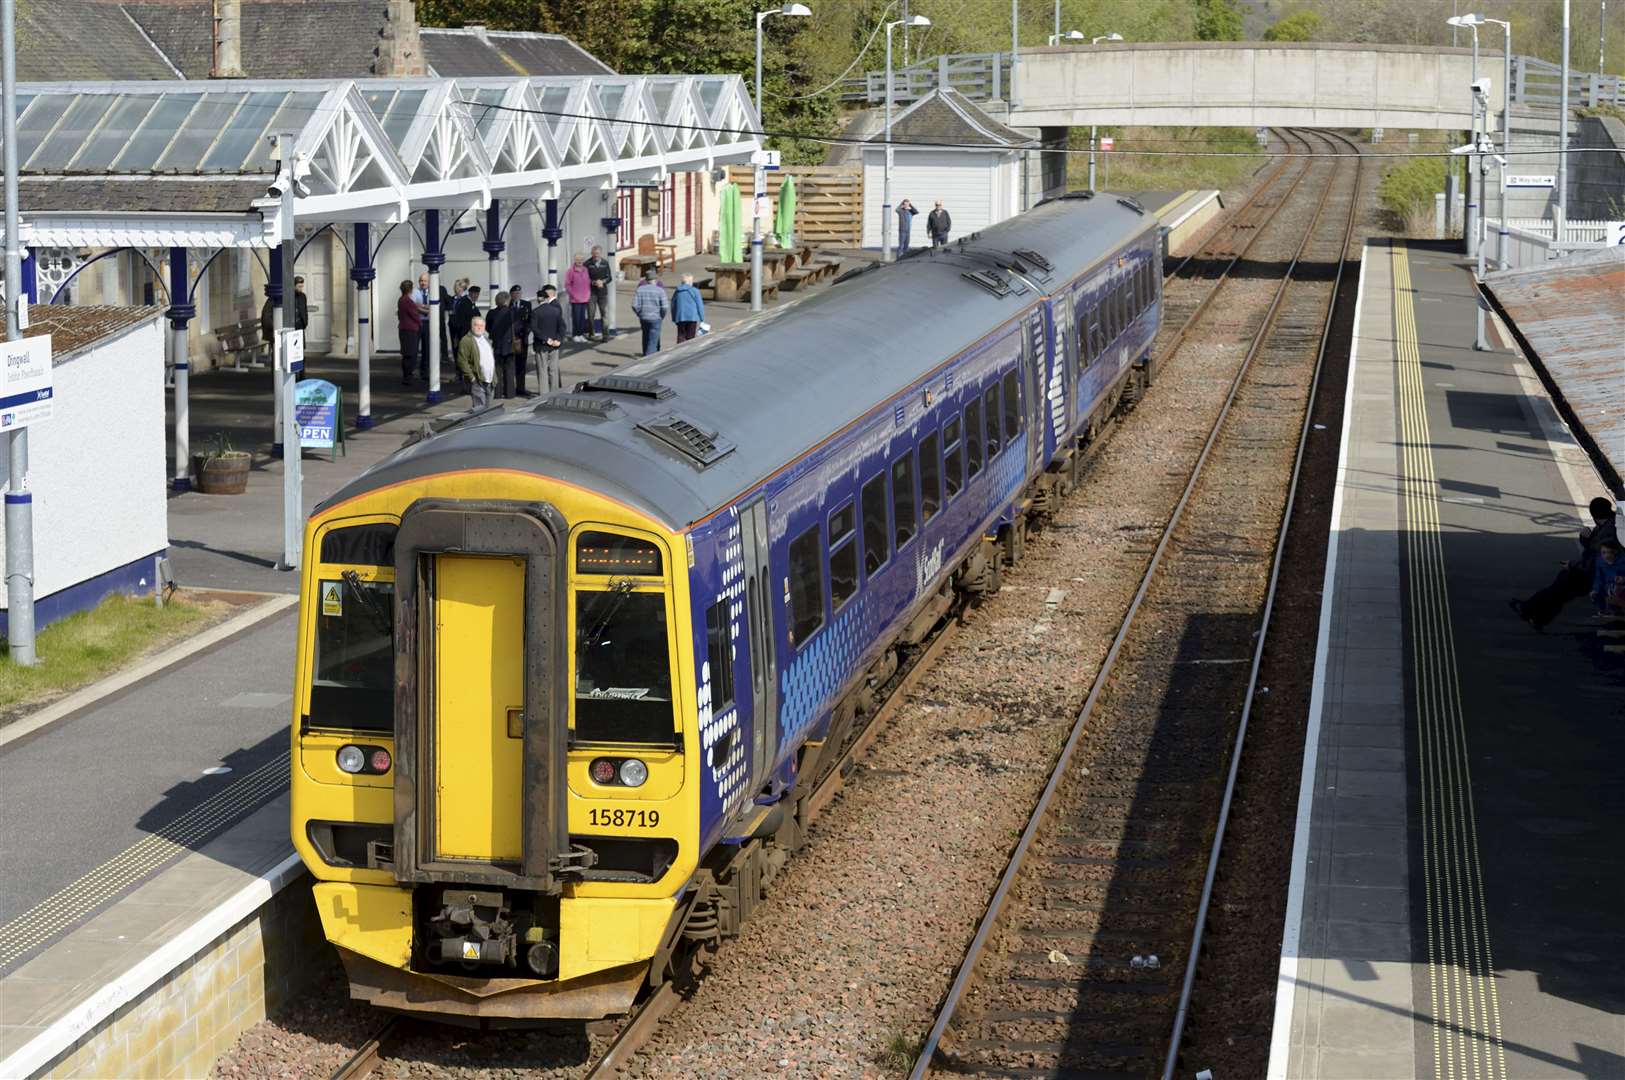 Dingwall could become a 'gateway' to the Highlands for rail visitors, a move being backed by councillors including Struan Mackie.